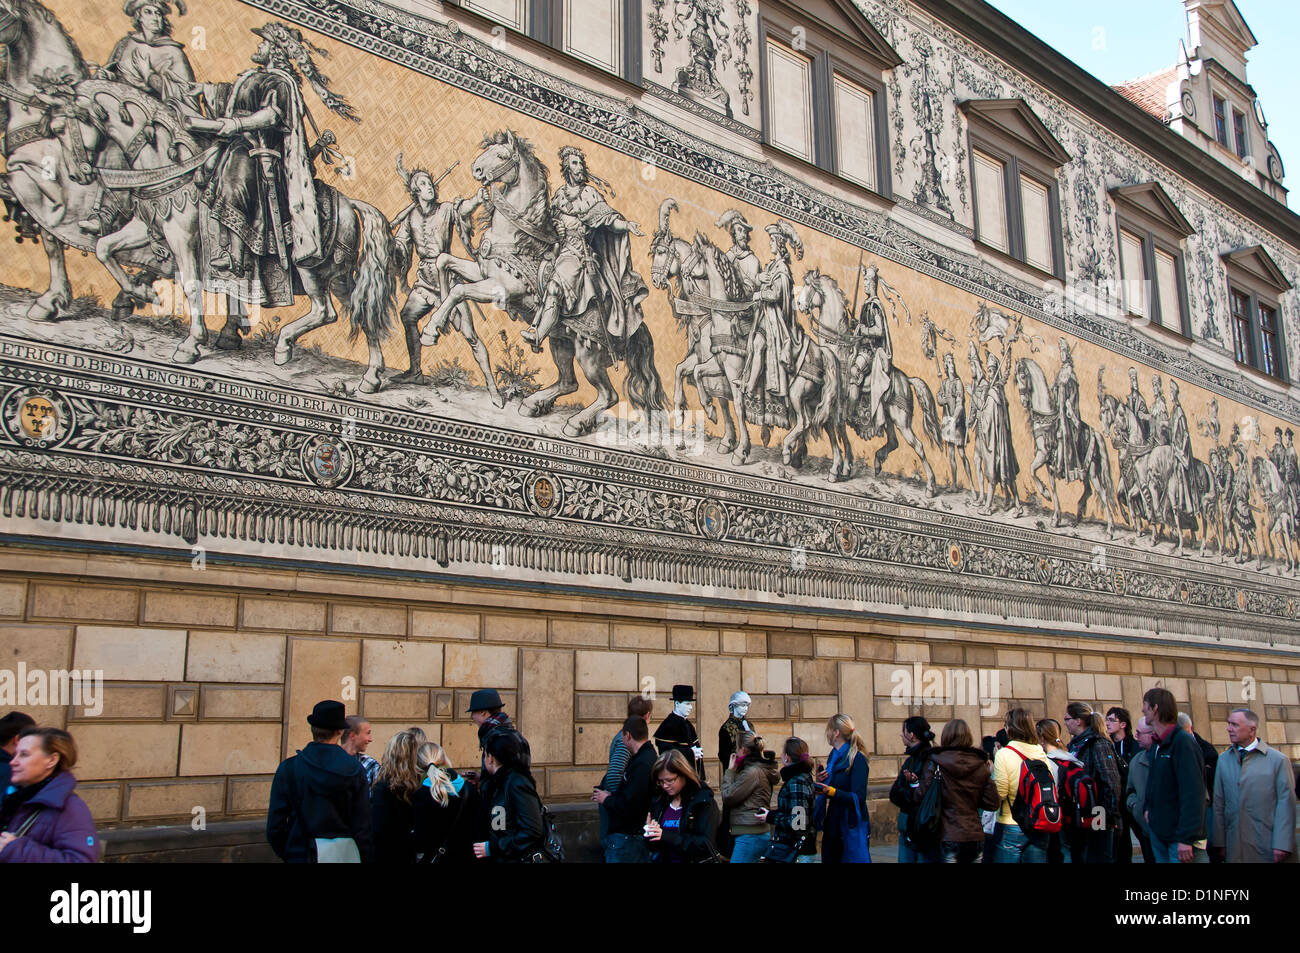 Furstenzug or the Procession of Princes exterior landmark mural with tourists, Dresden, Germany Stock Photo